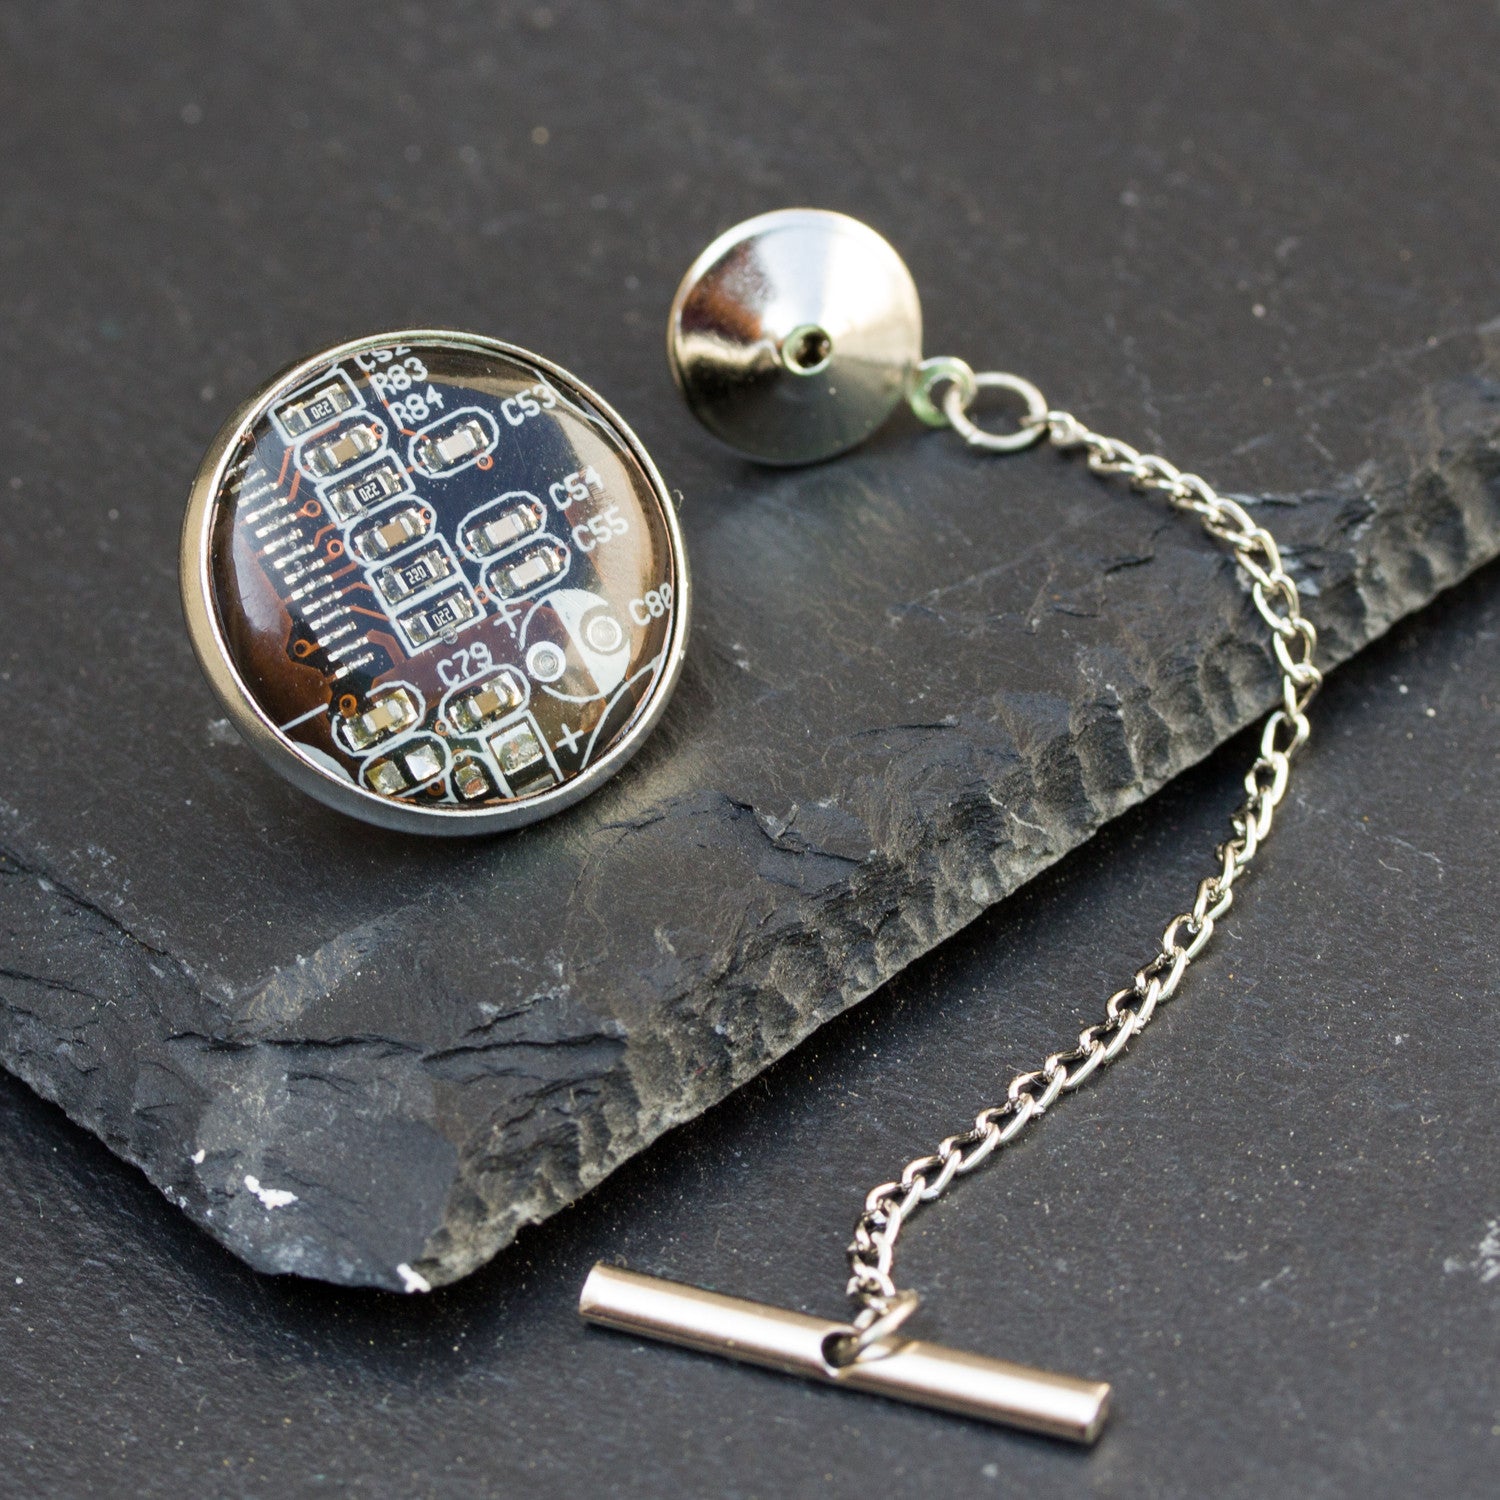 Circuit board tie pin with a chain